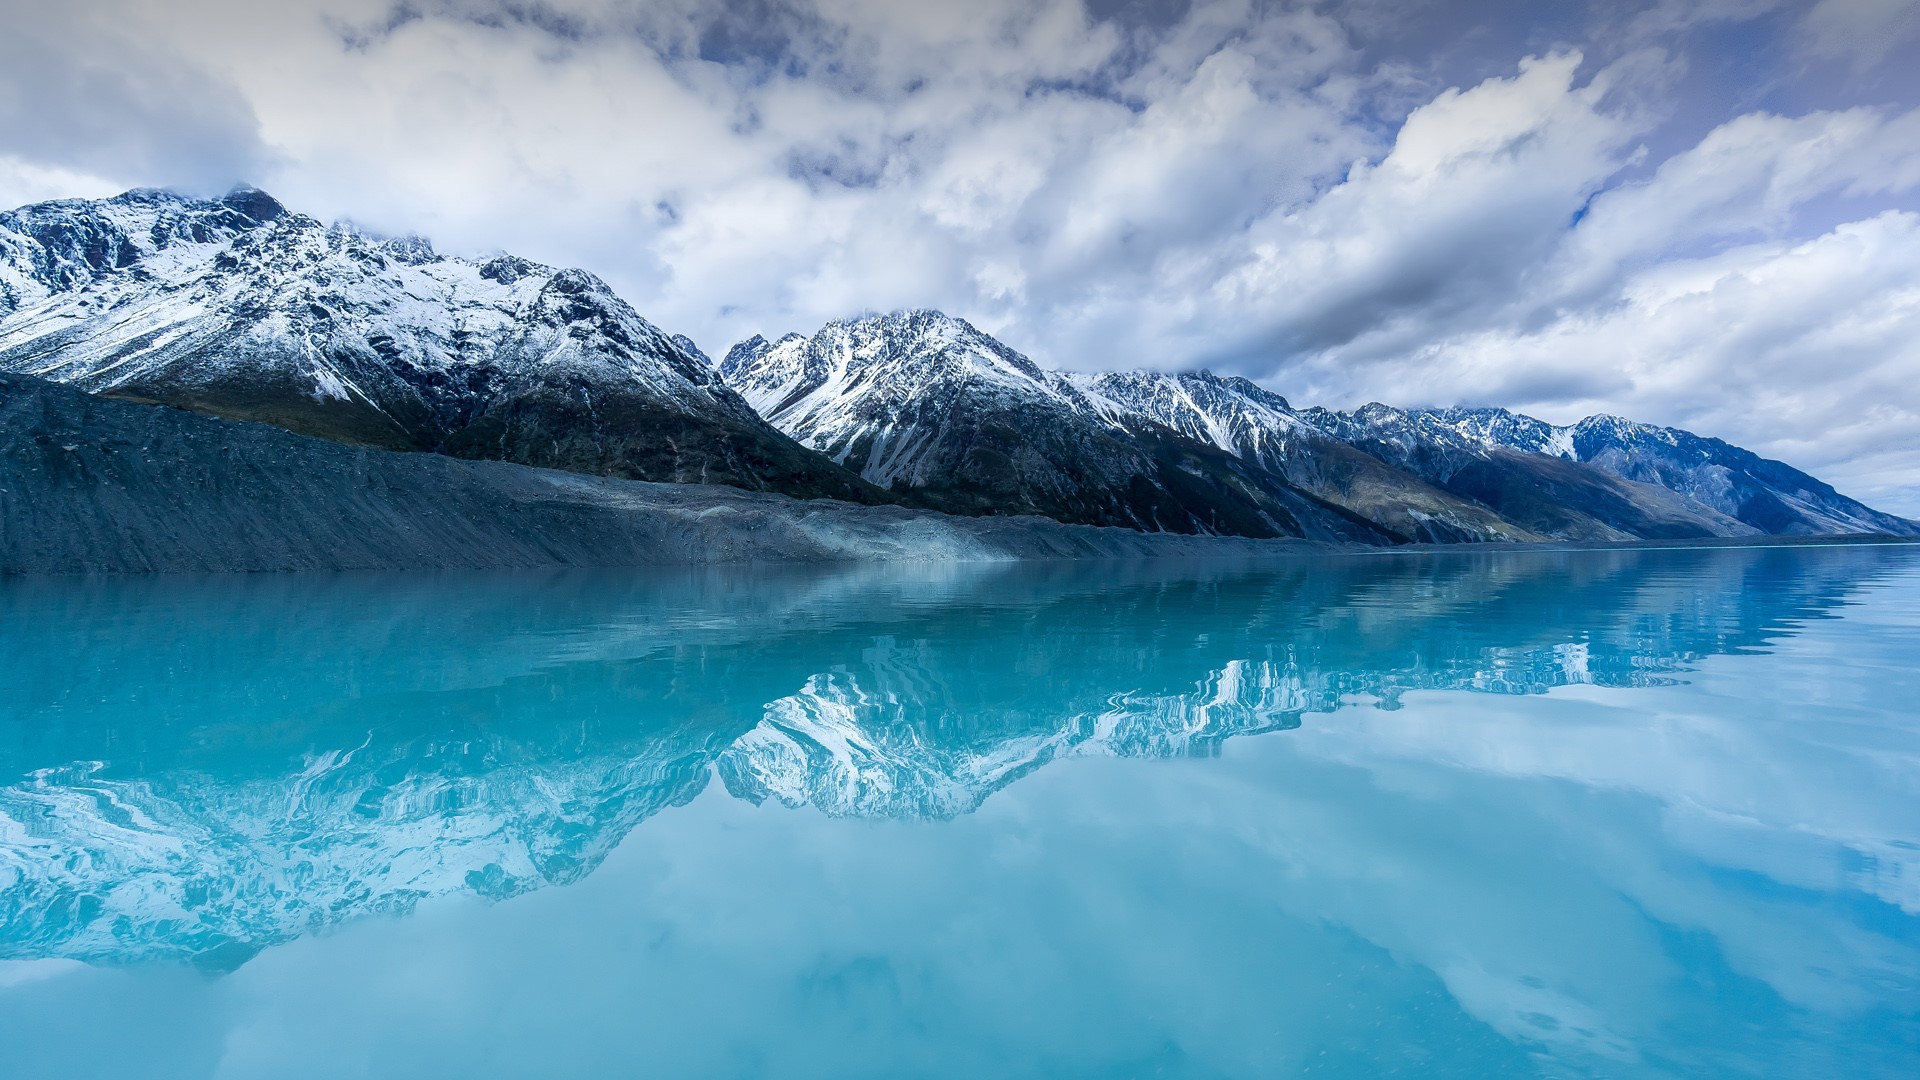 General 1920x1080 nature landscape mountains snow clouds sky water water ripples reflection snowy mountain Tasman Lake New Zealand